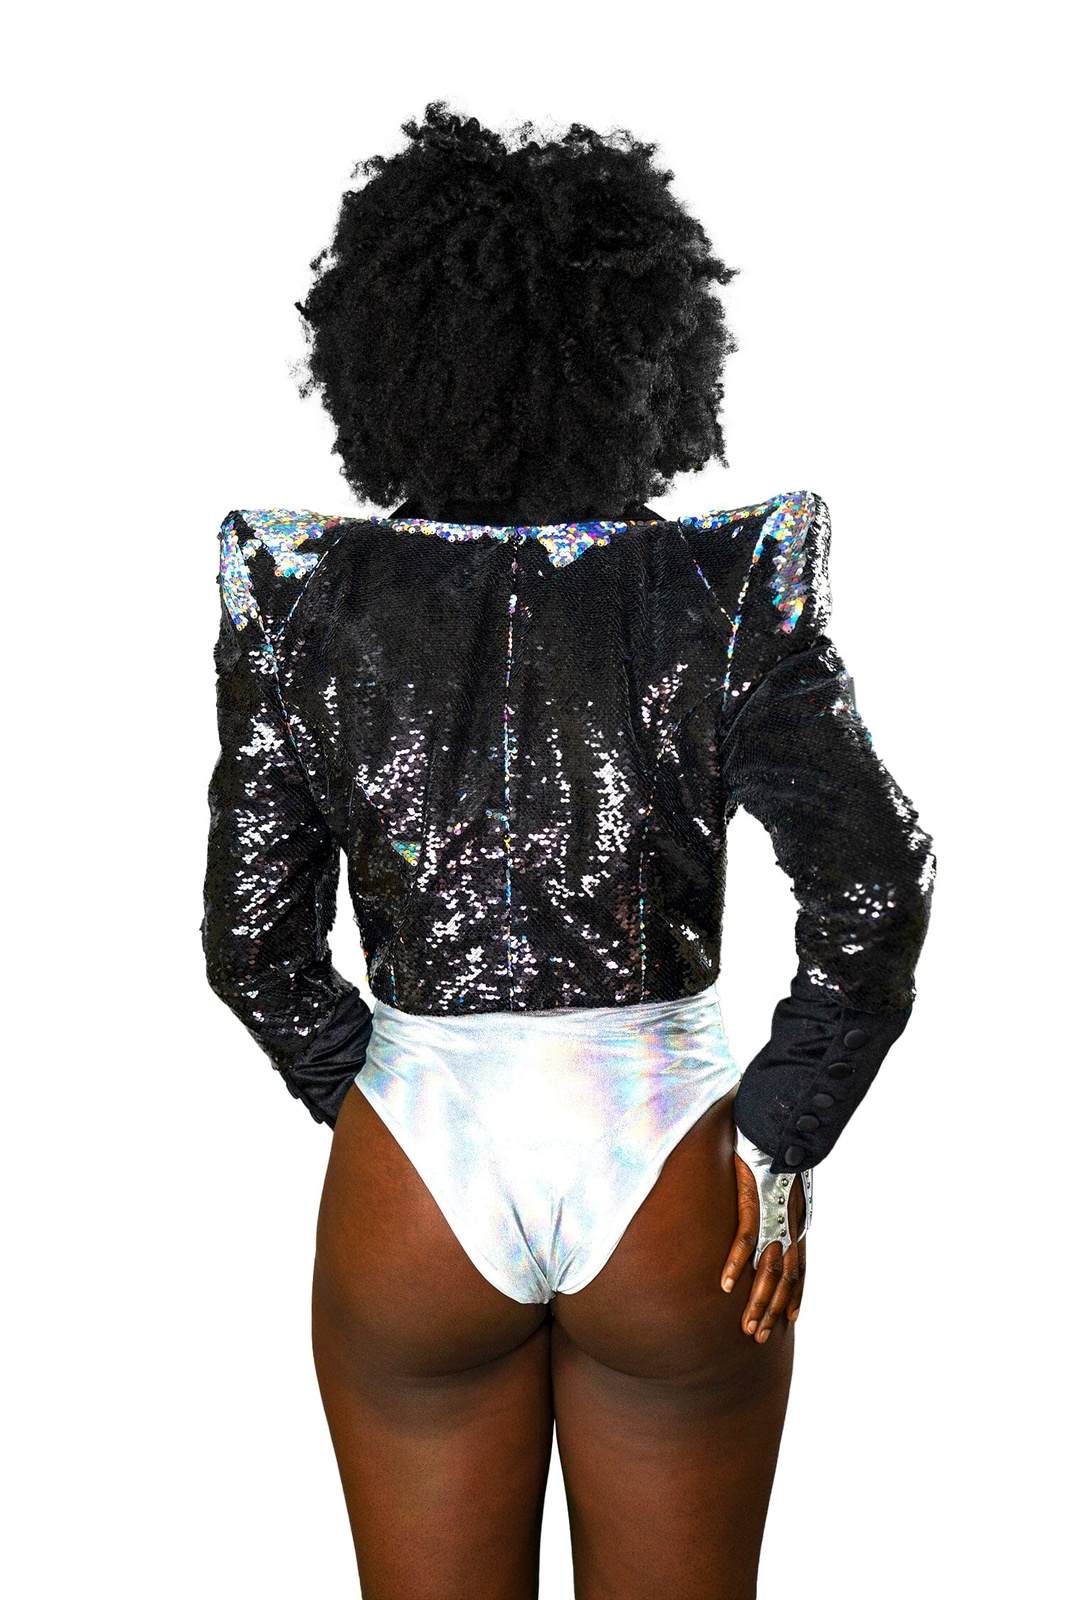 Love Khaos Iridescent cropped Sequin Jacket with pointed shoulders for halloween